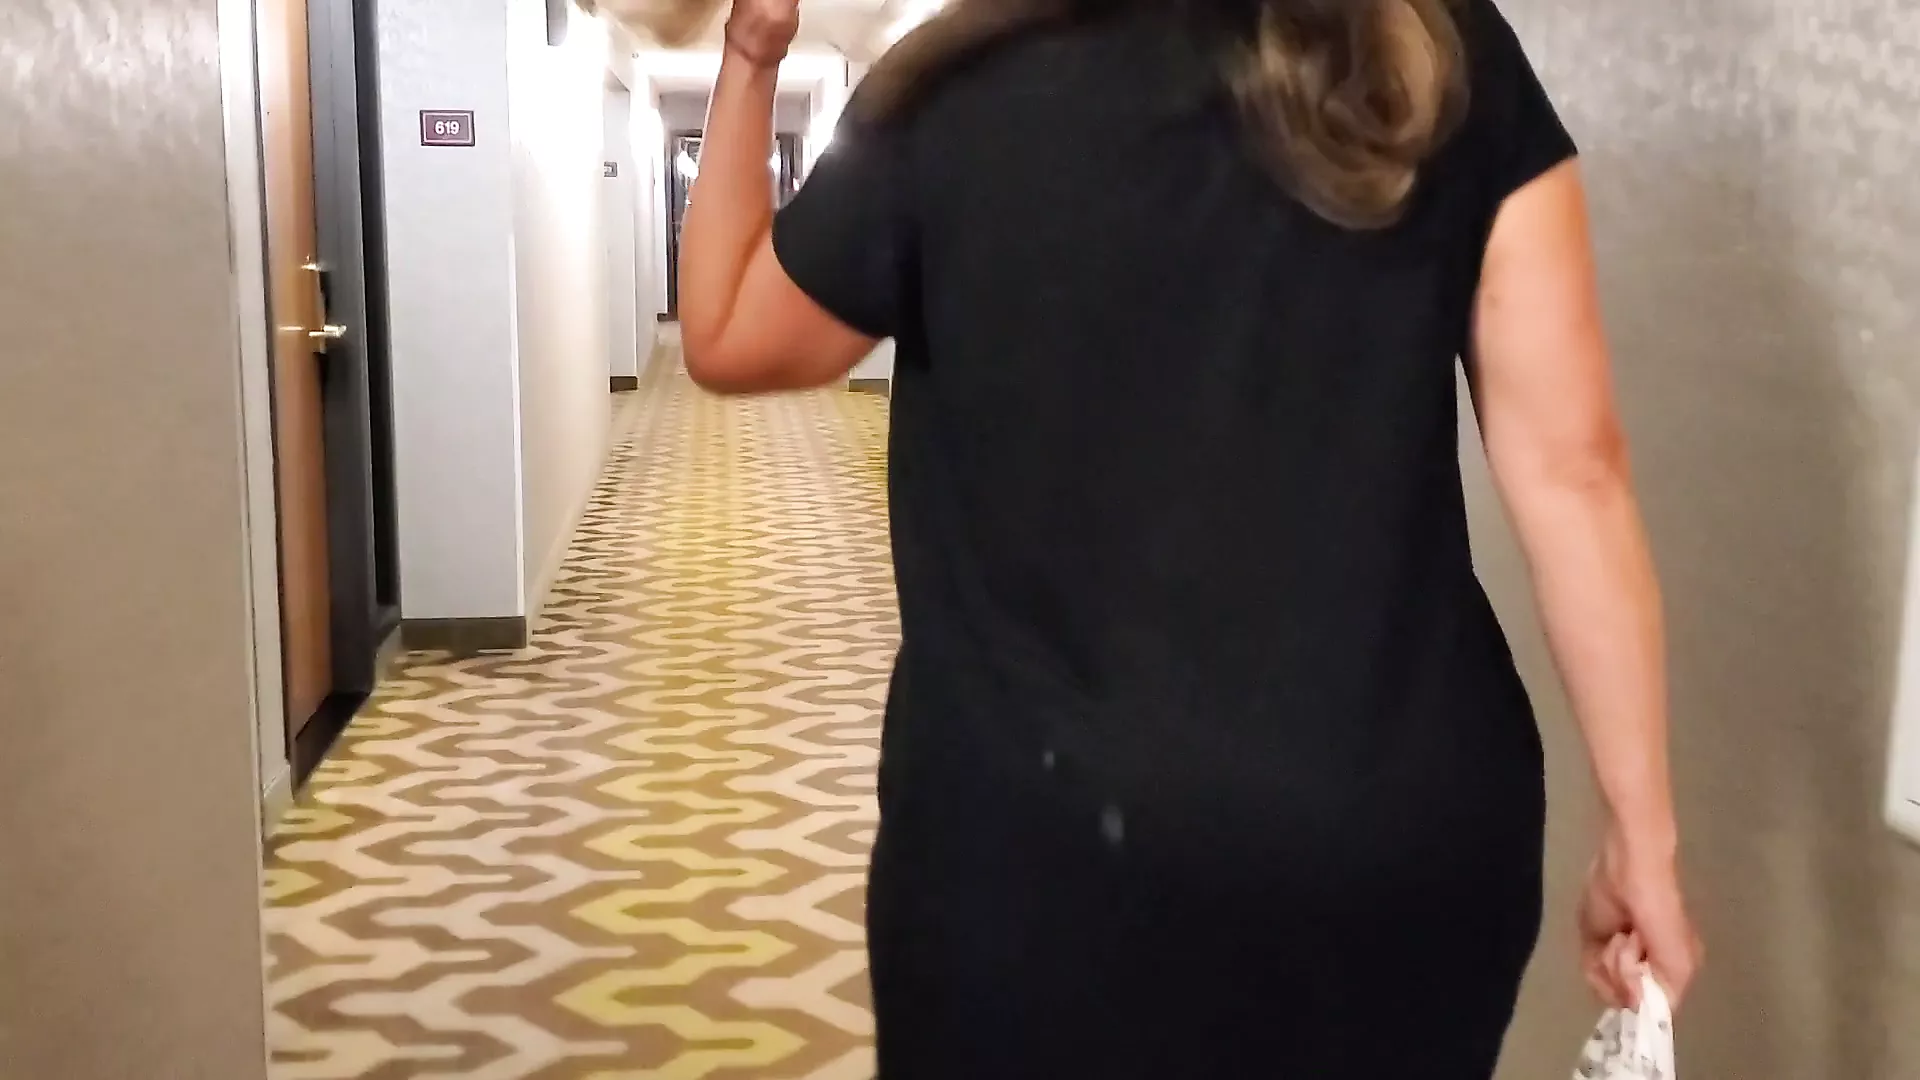 Cuckold Husband Takes Wife to Hotel pic pic